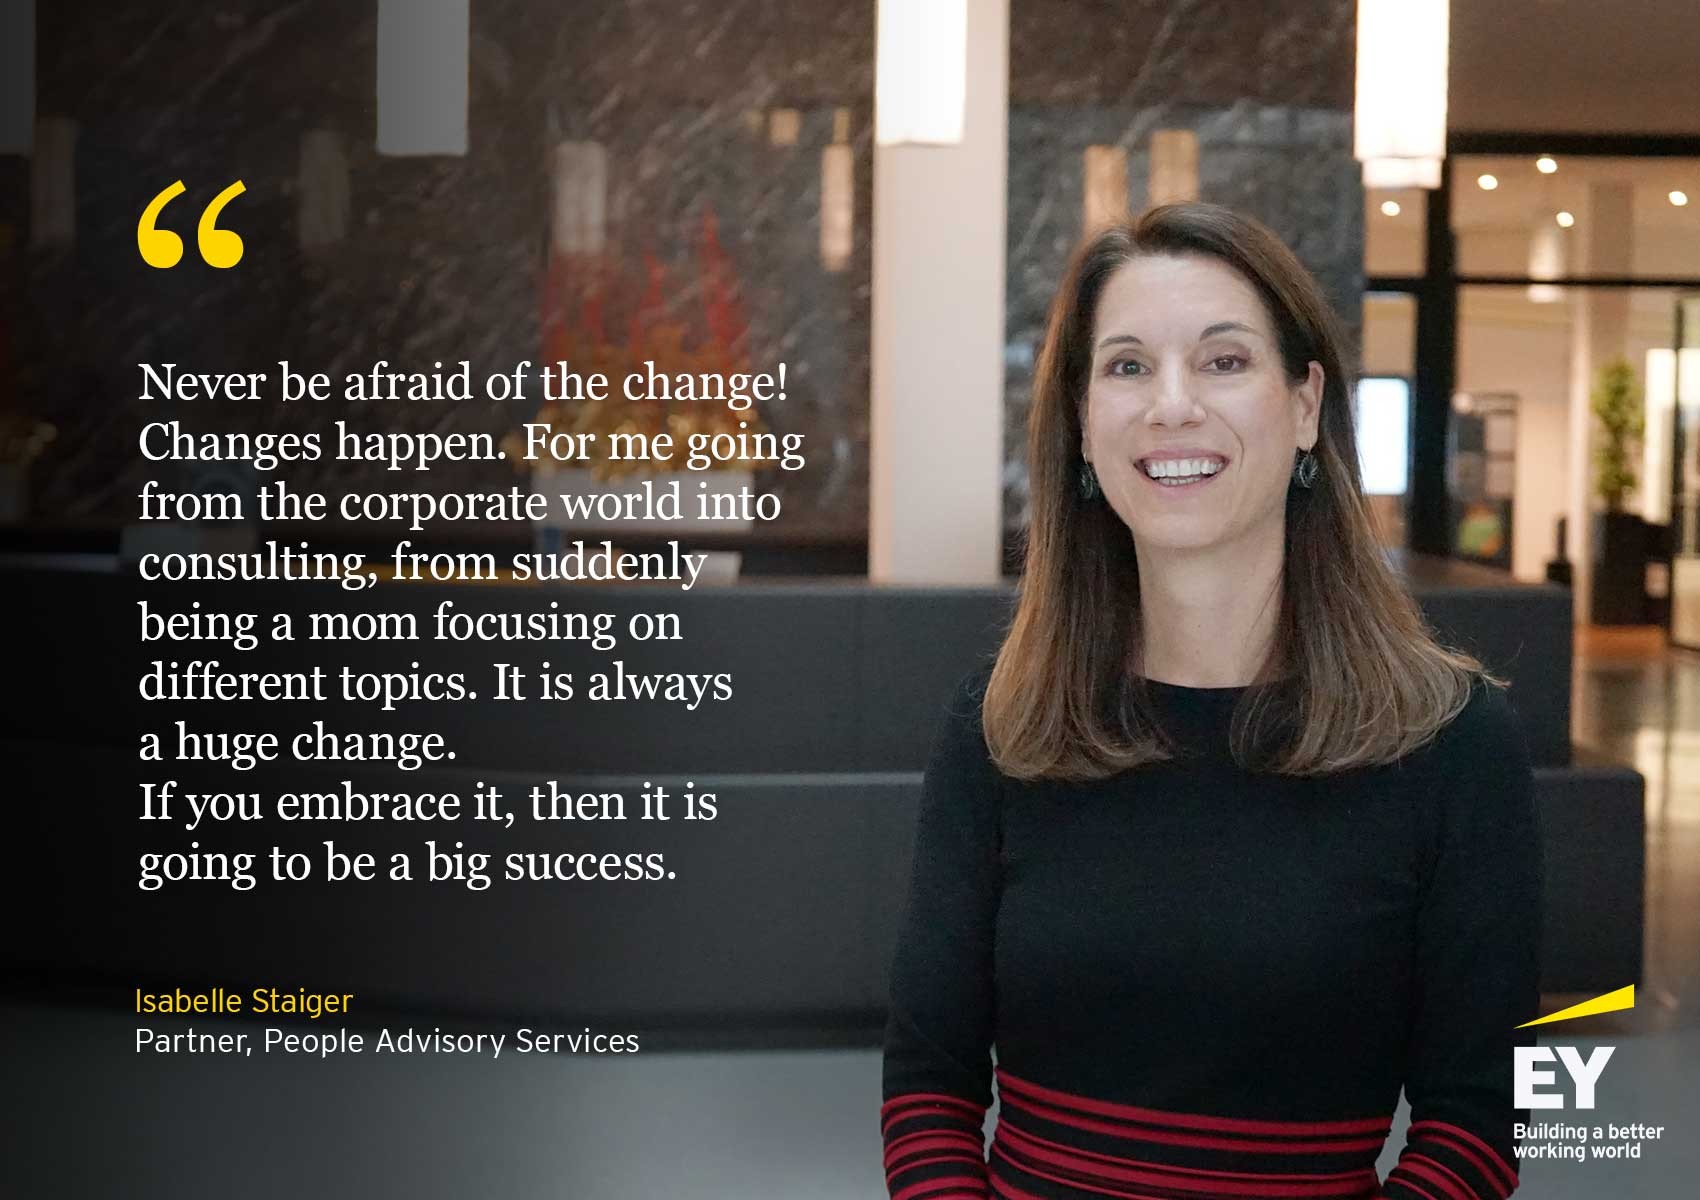 EY-Campaign-Extraordinary-Careers: Isabelle Staiger